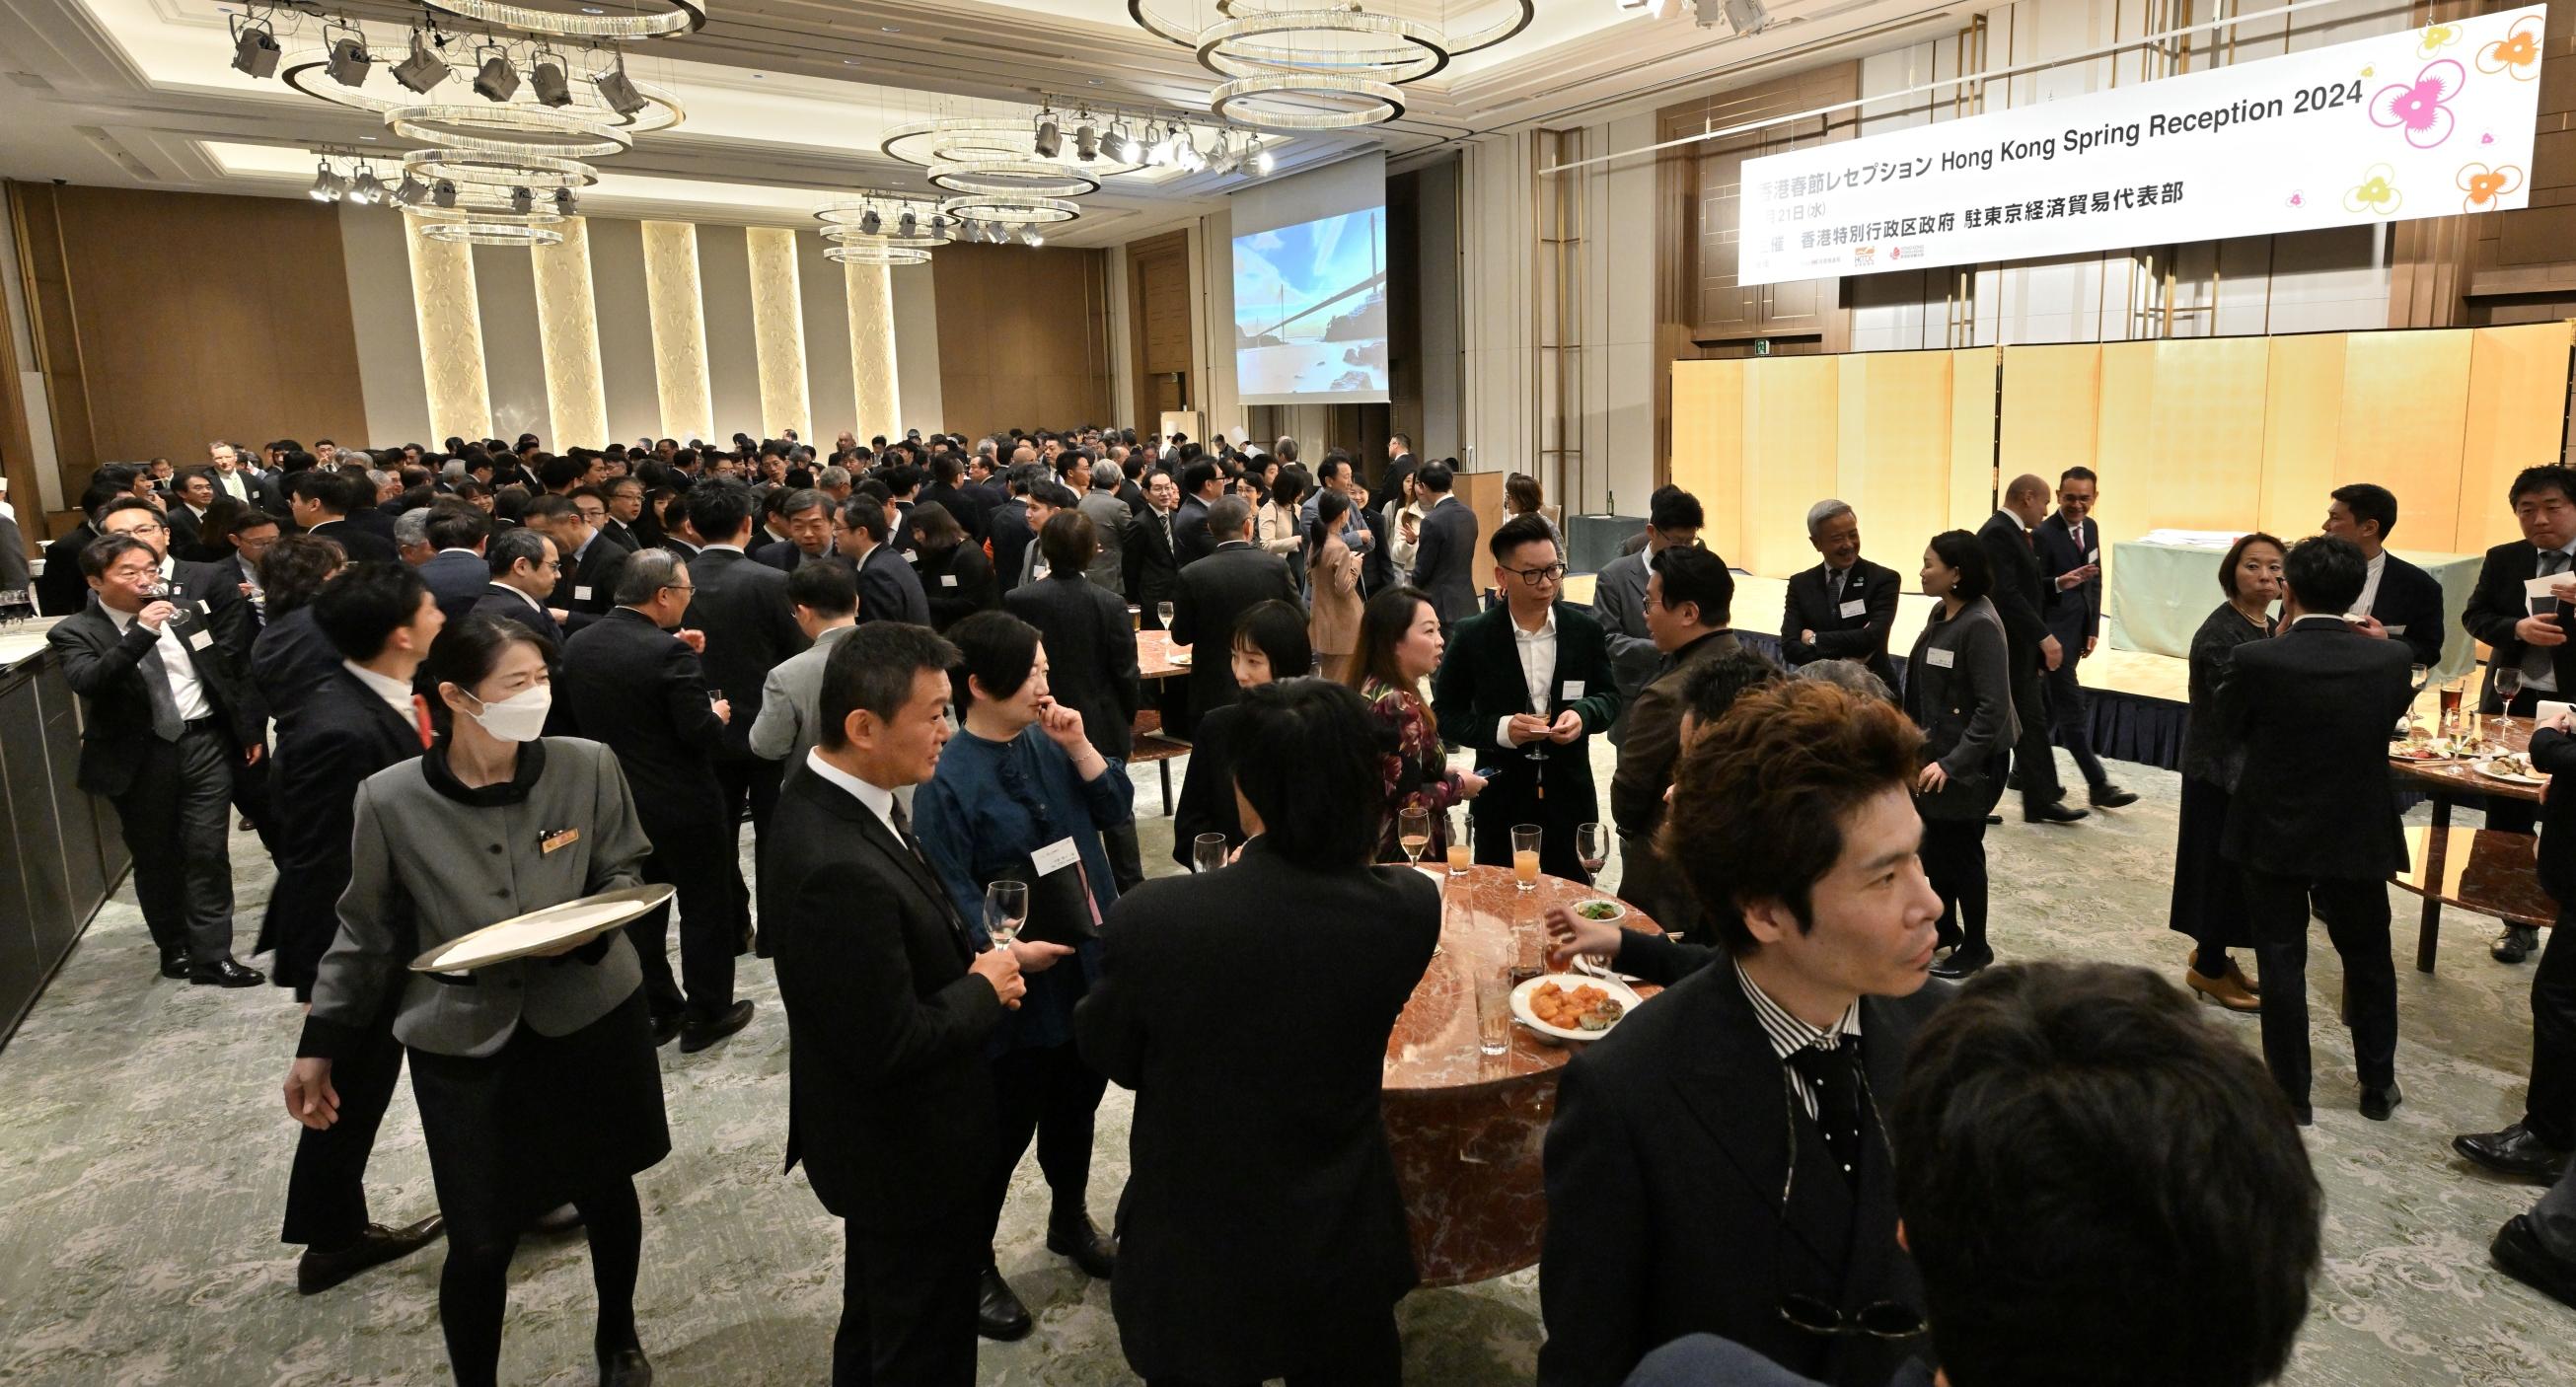 About 450 guests attend the spring reception held by the Hong Kong Economic and Trade Office (Tokyo) in Tokyo today (February 21).